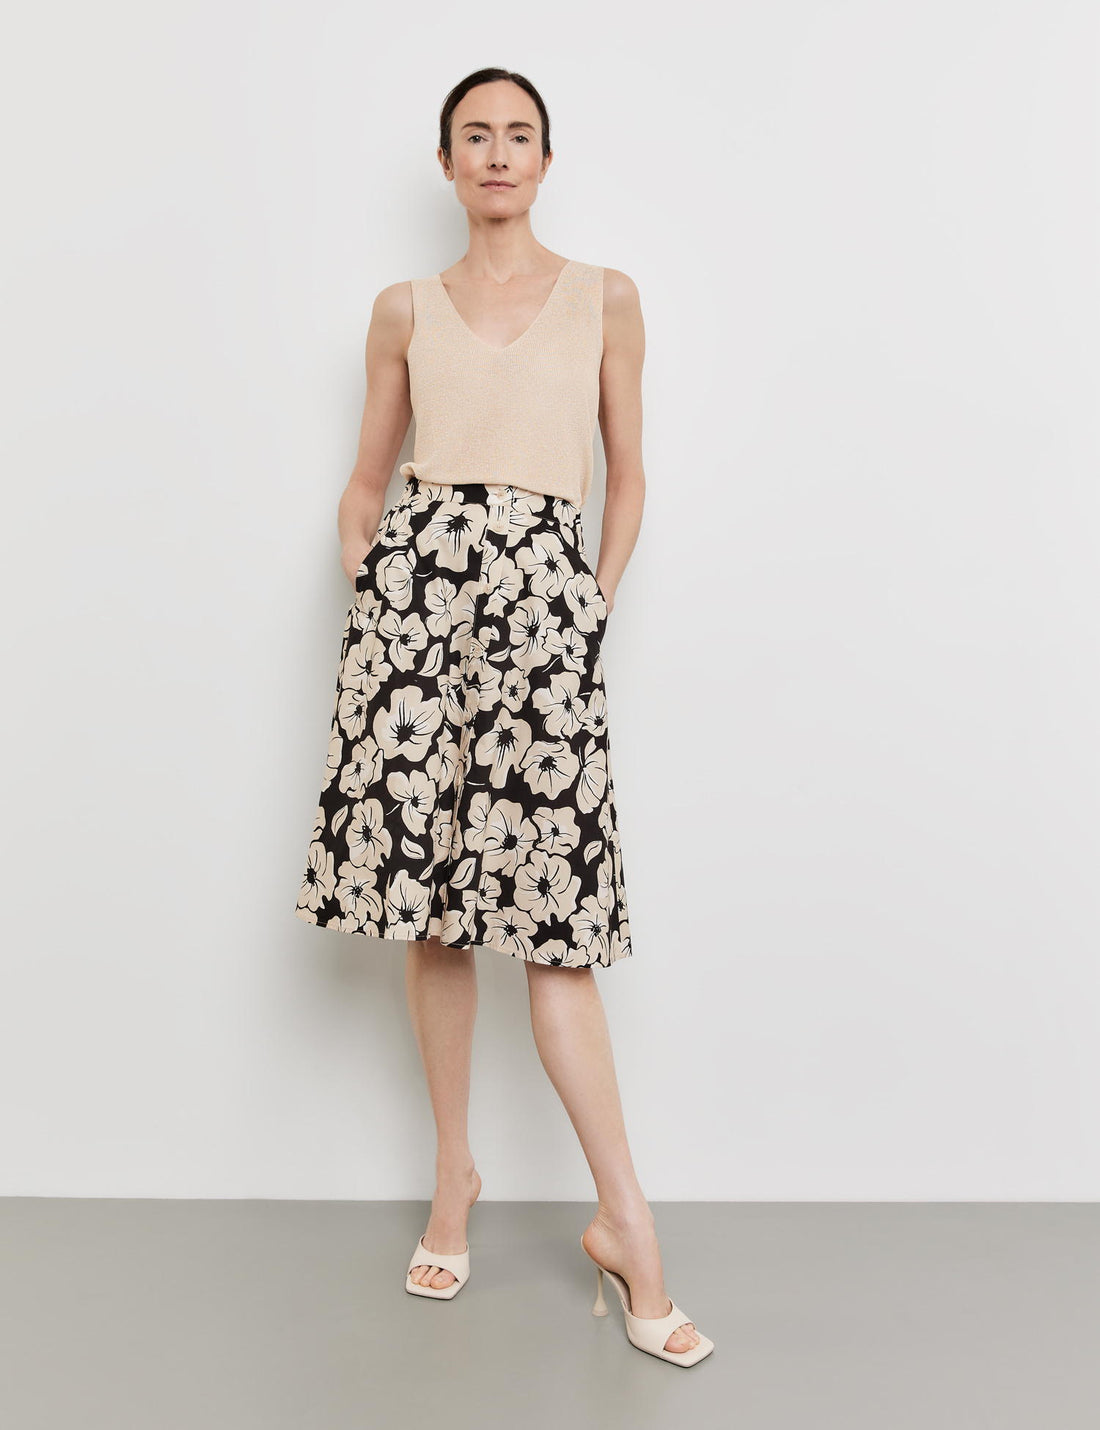 Midi Skirt With A Floral Pattern_310015-31511_1098_01